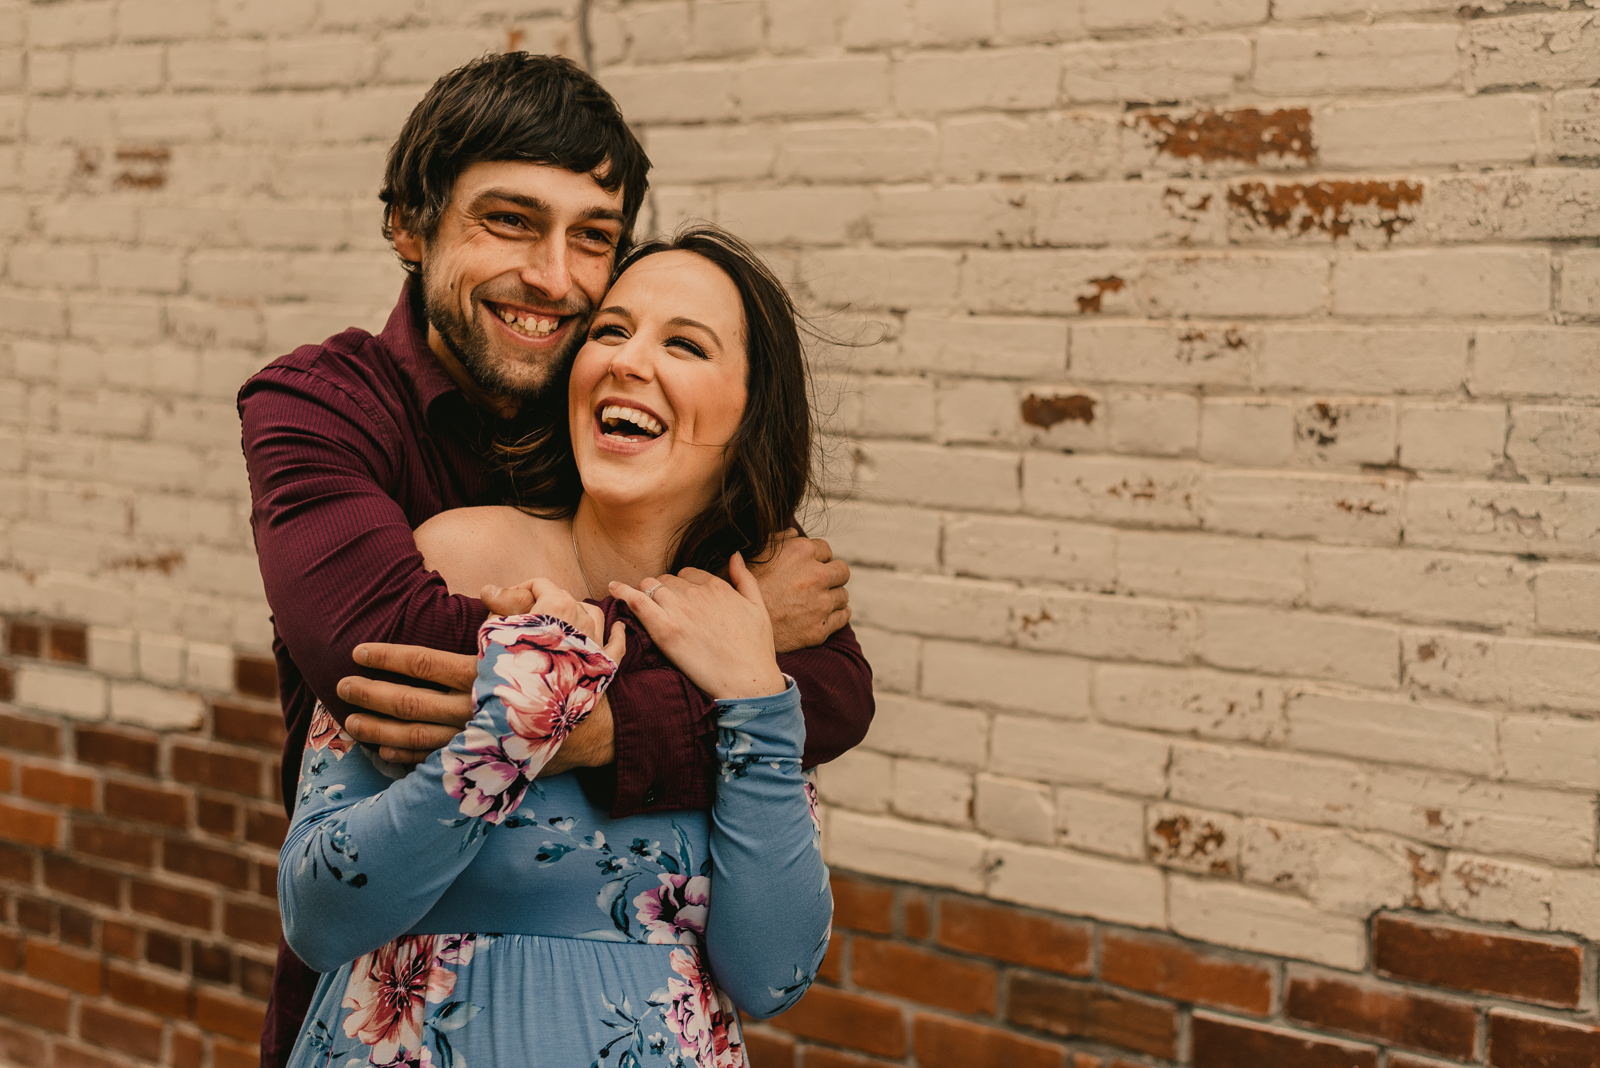 authentic engagement photography tips